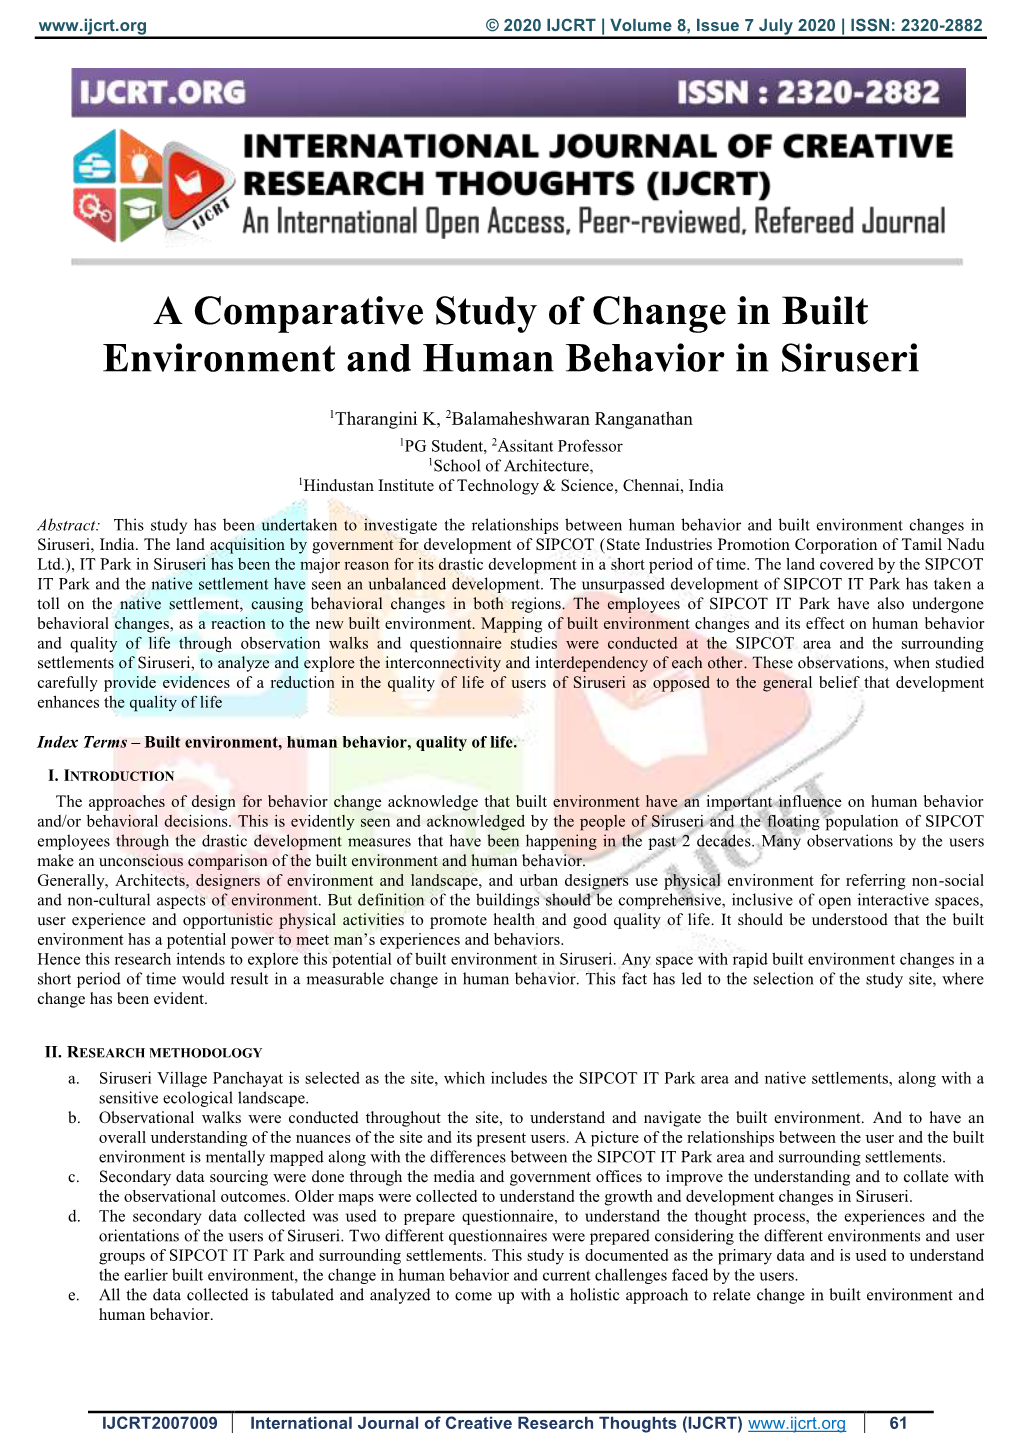 A Comparative Study of Change in Built Environment and Human Behavior in Siruseri